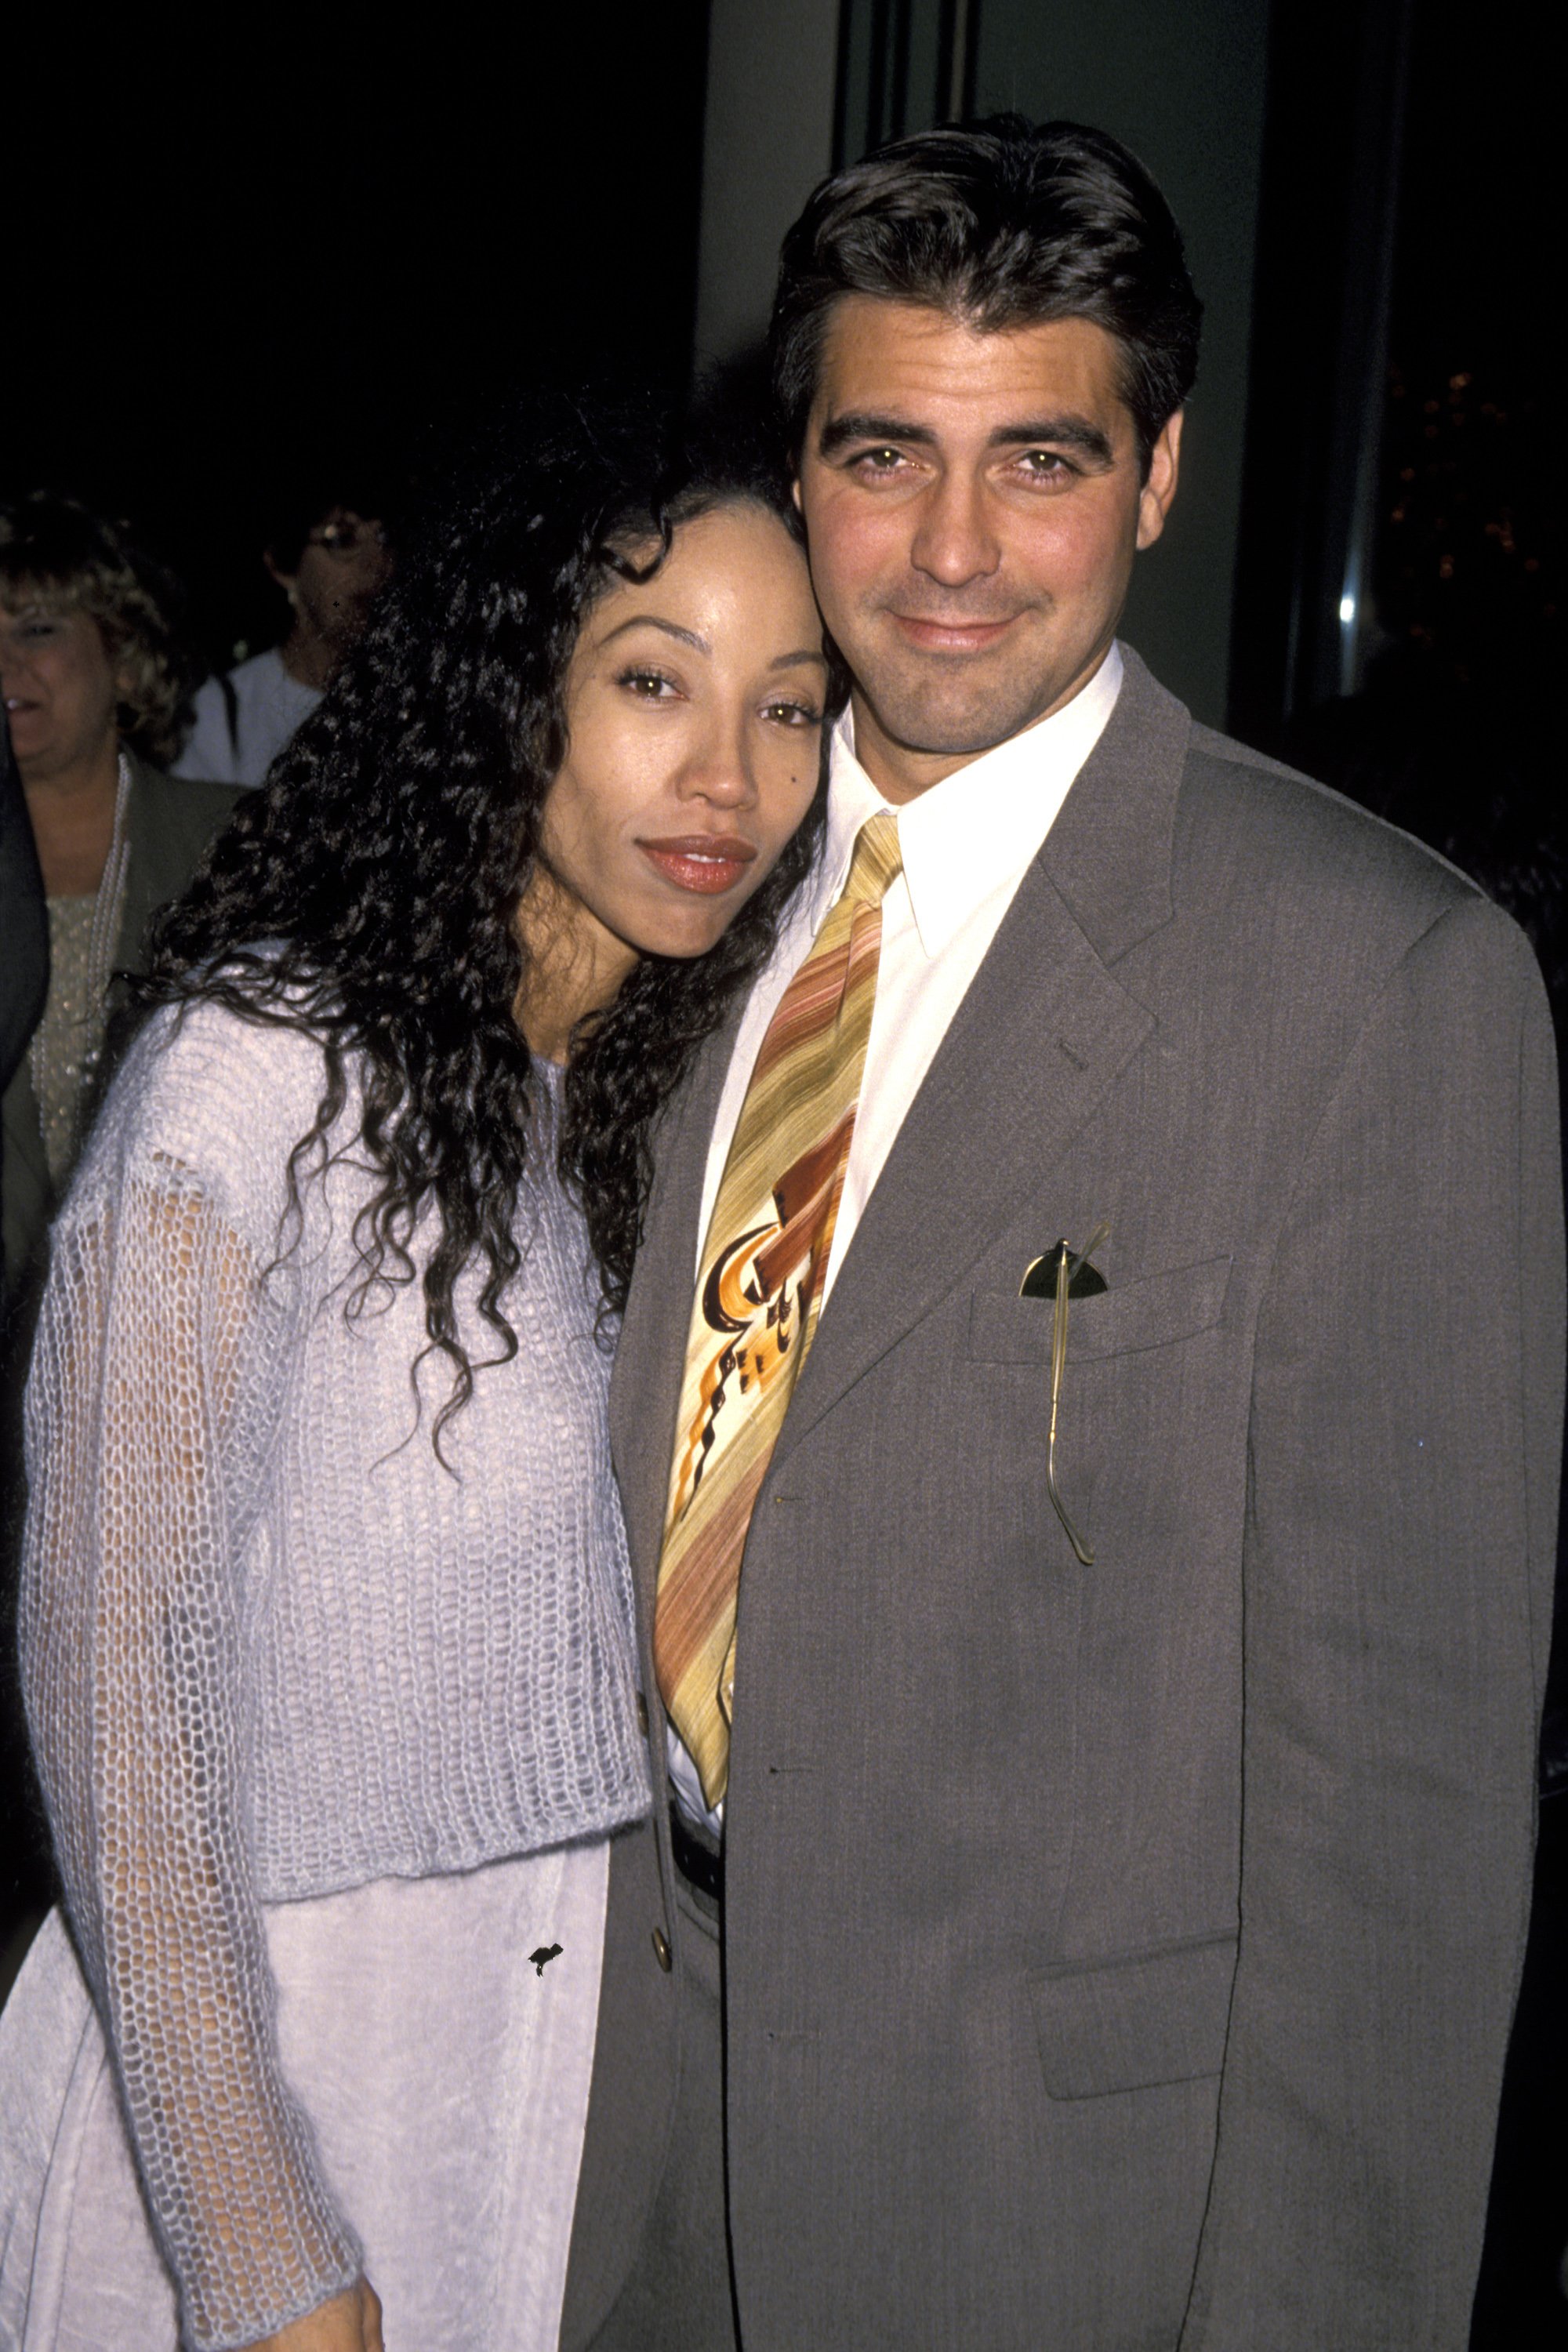 Actress Kimberly Russell and George Clooney at the Beverly Hilton Hotel in Beverly Hills, California. / Source: Getty Images